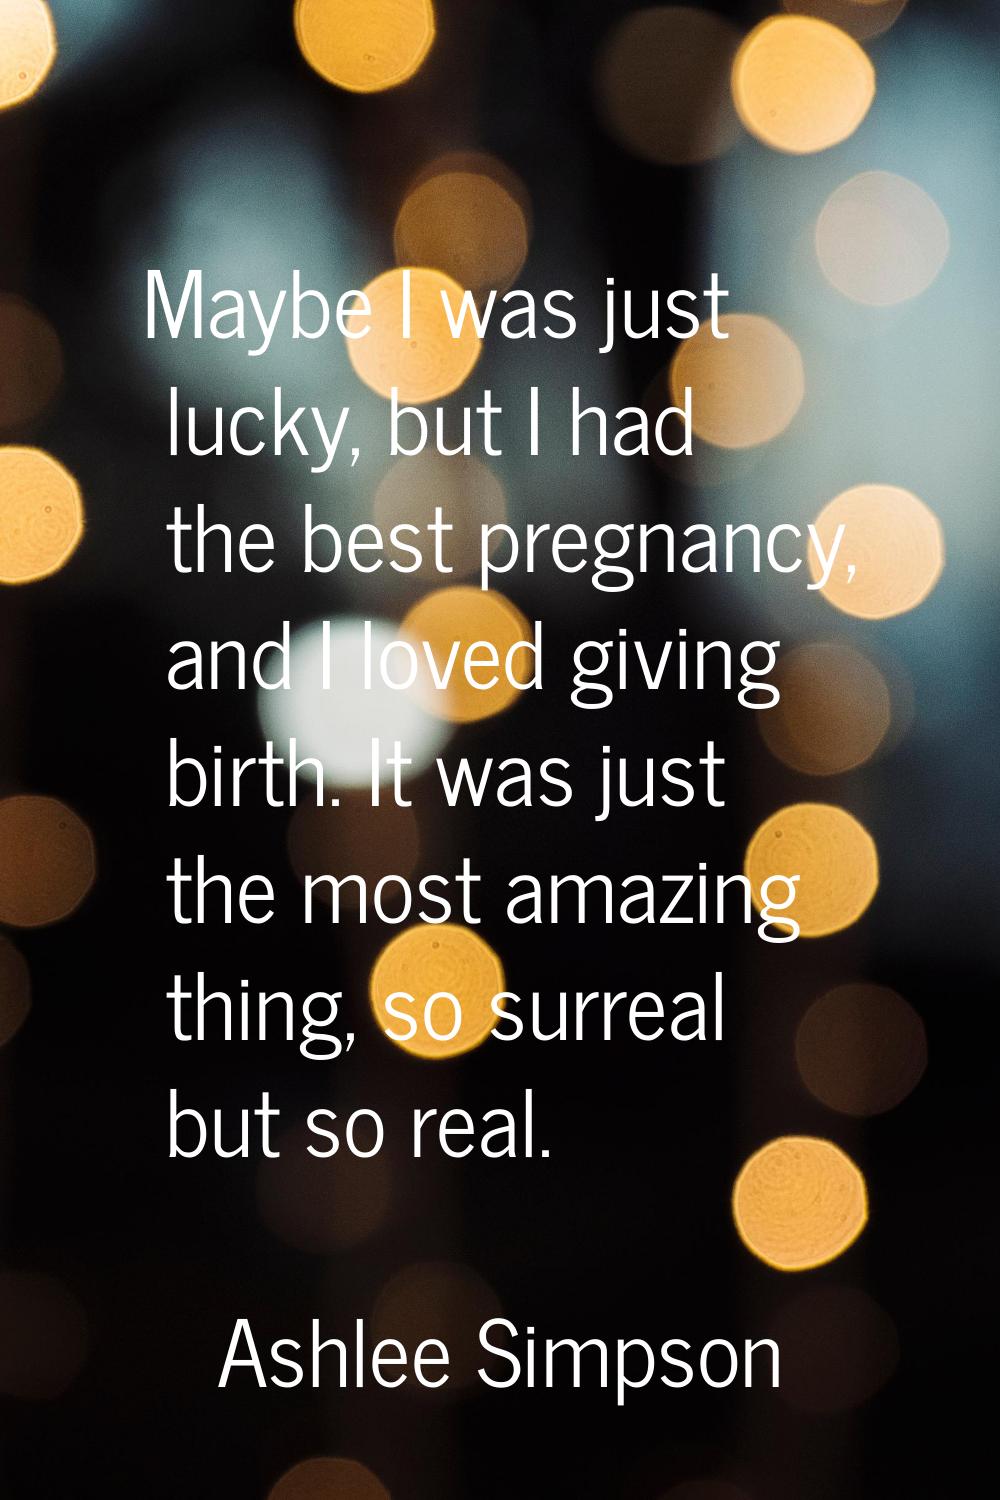 Maybe I was just lucky, but I had the best pregnancy, and I loved giving birth. It was just the mos